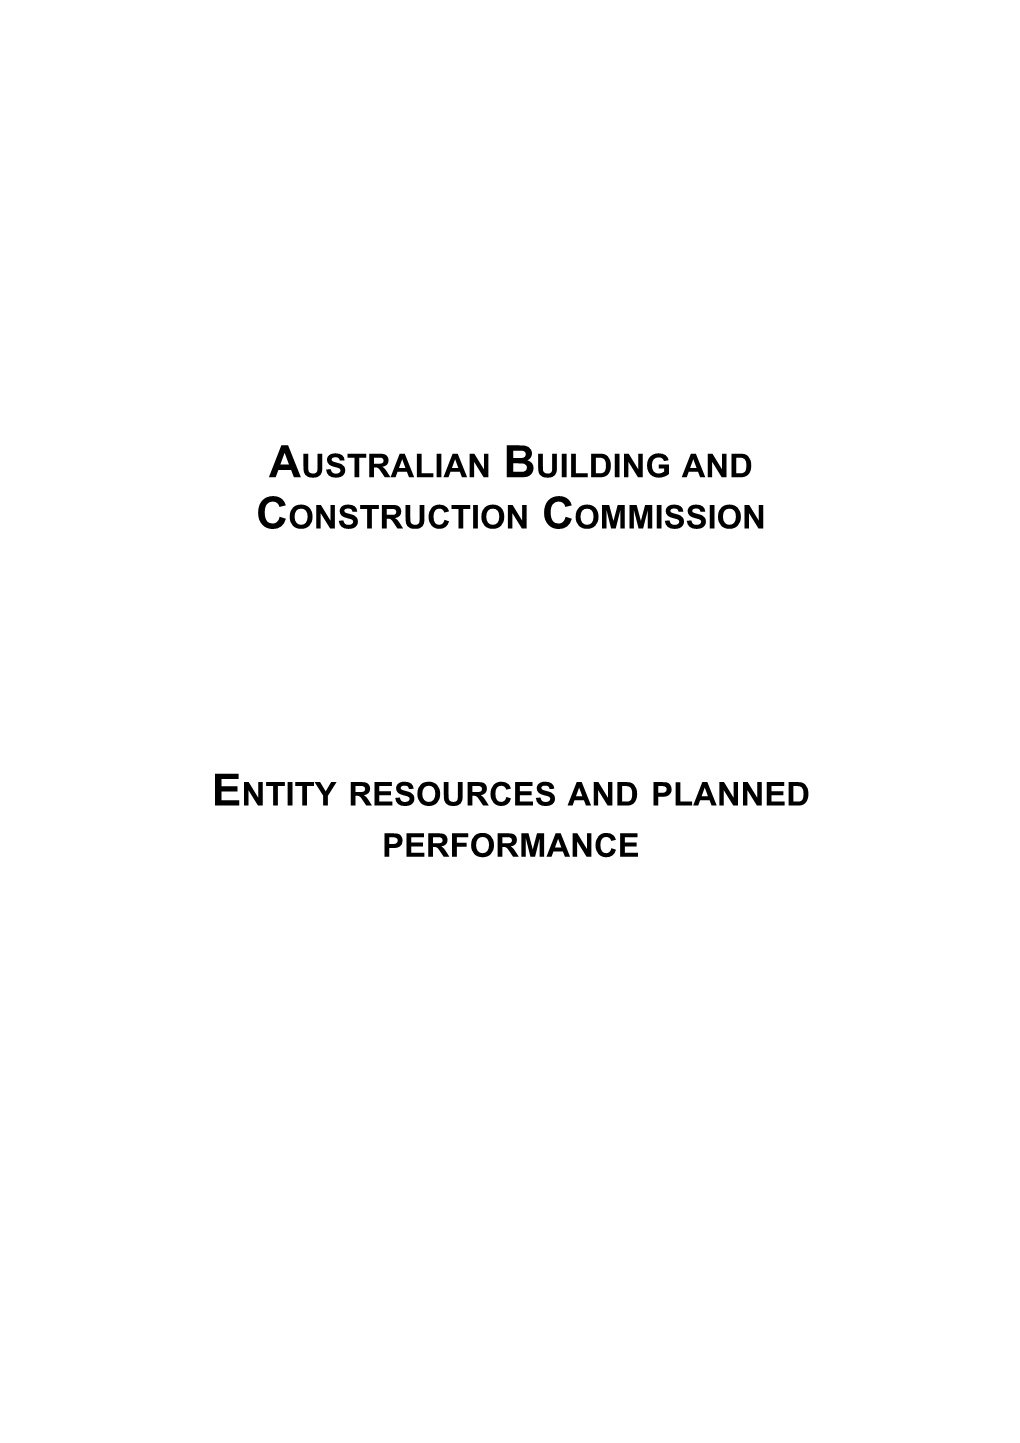 Australian Building and Construction Commission